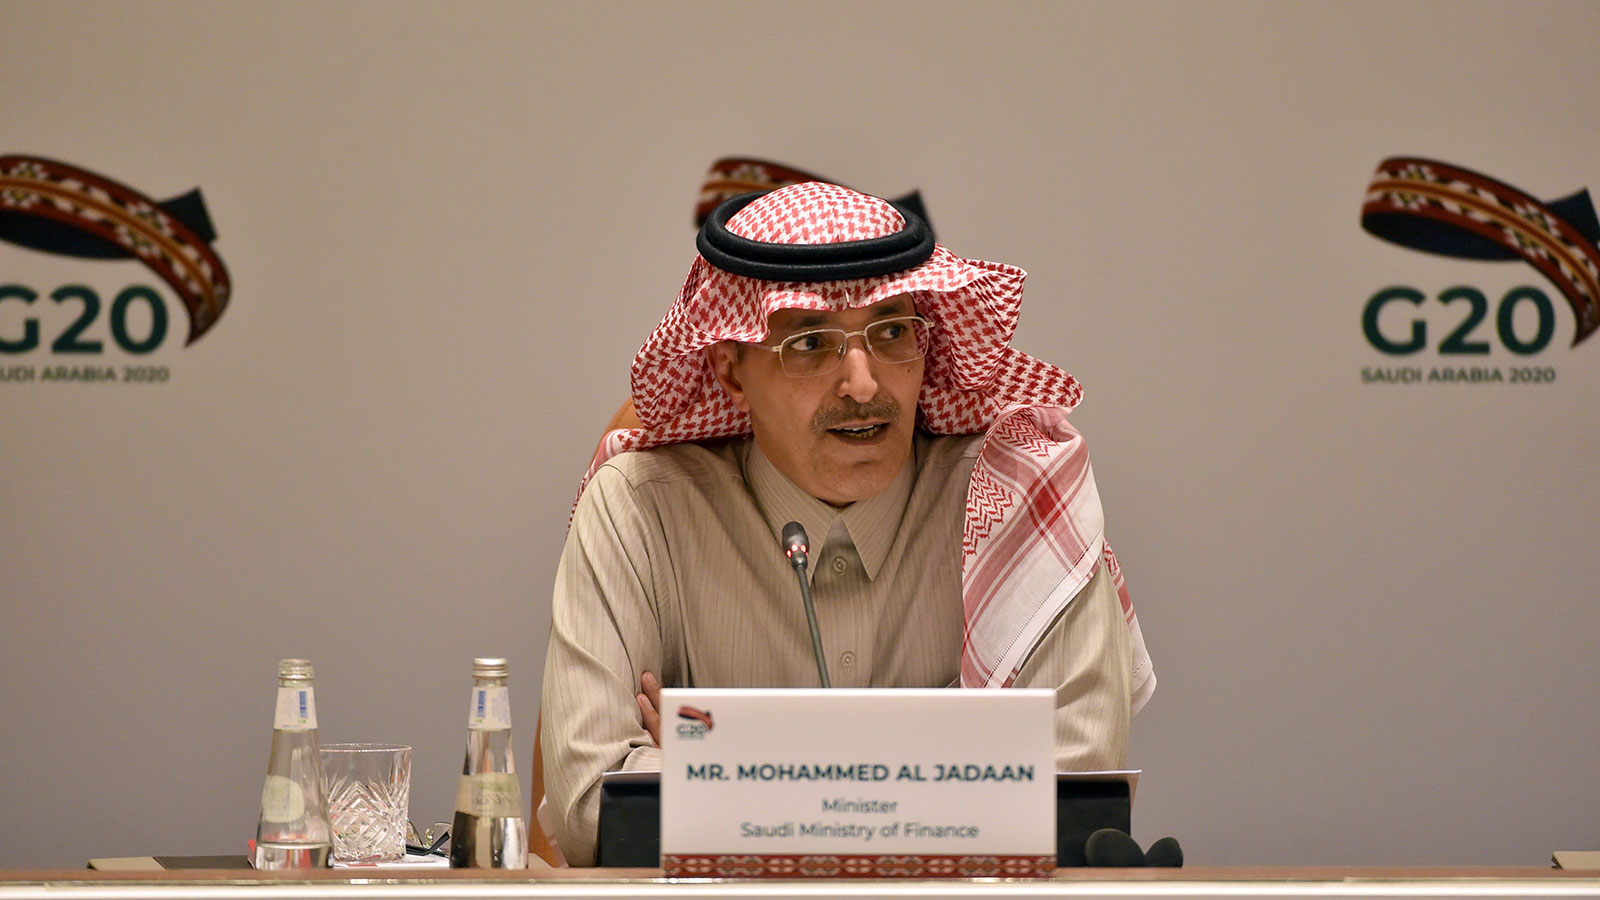 Saudi Minister of Finance Mohammed Al-Jadaan speaks during a meeting of finance ministers and central bank governors of the G20 nations on February 23, 2020.